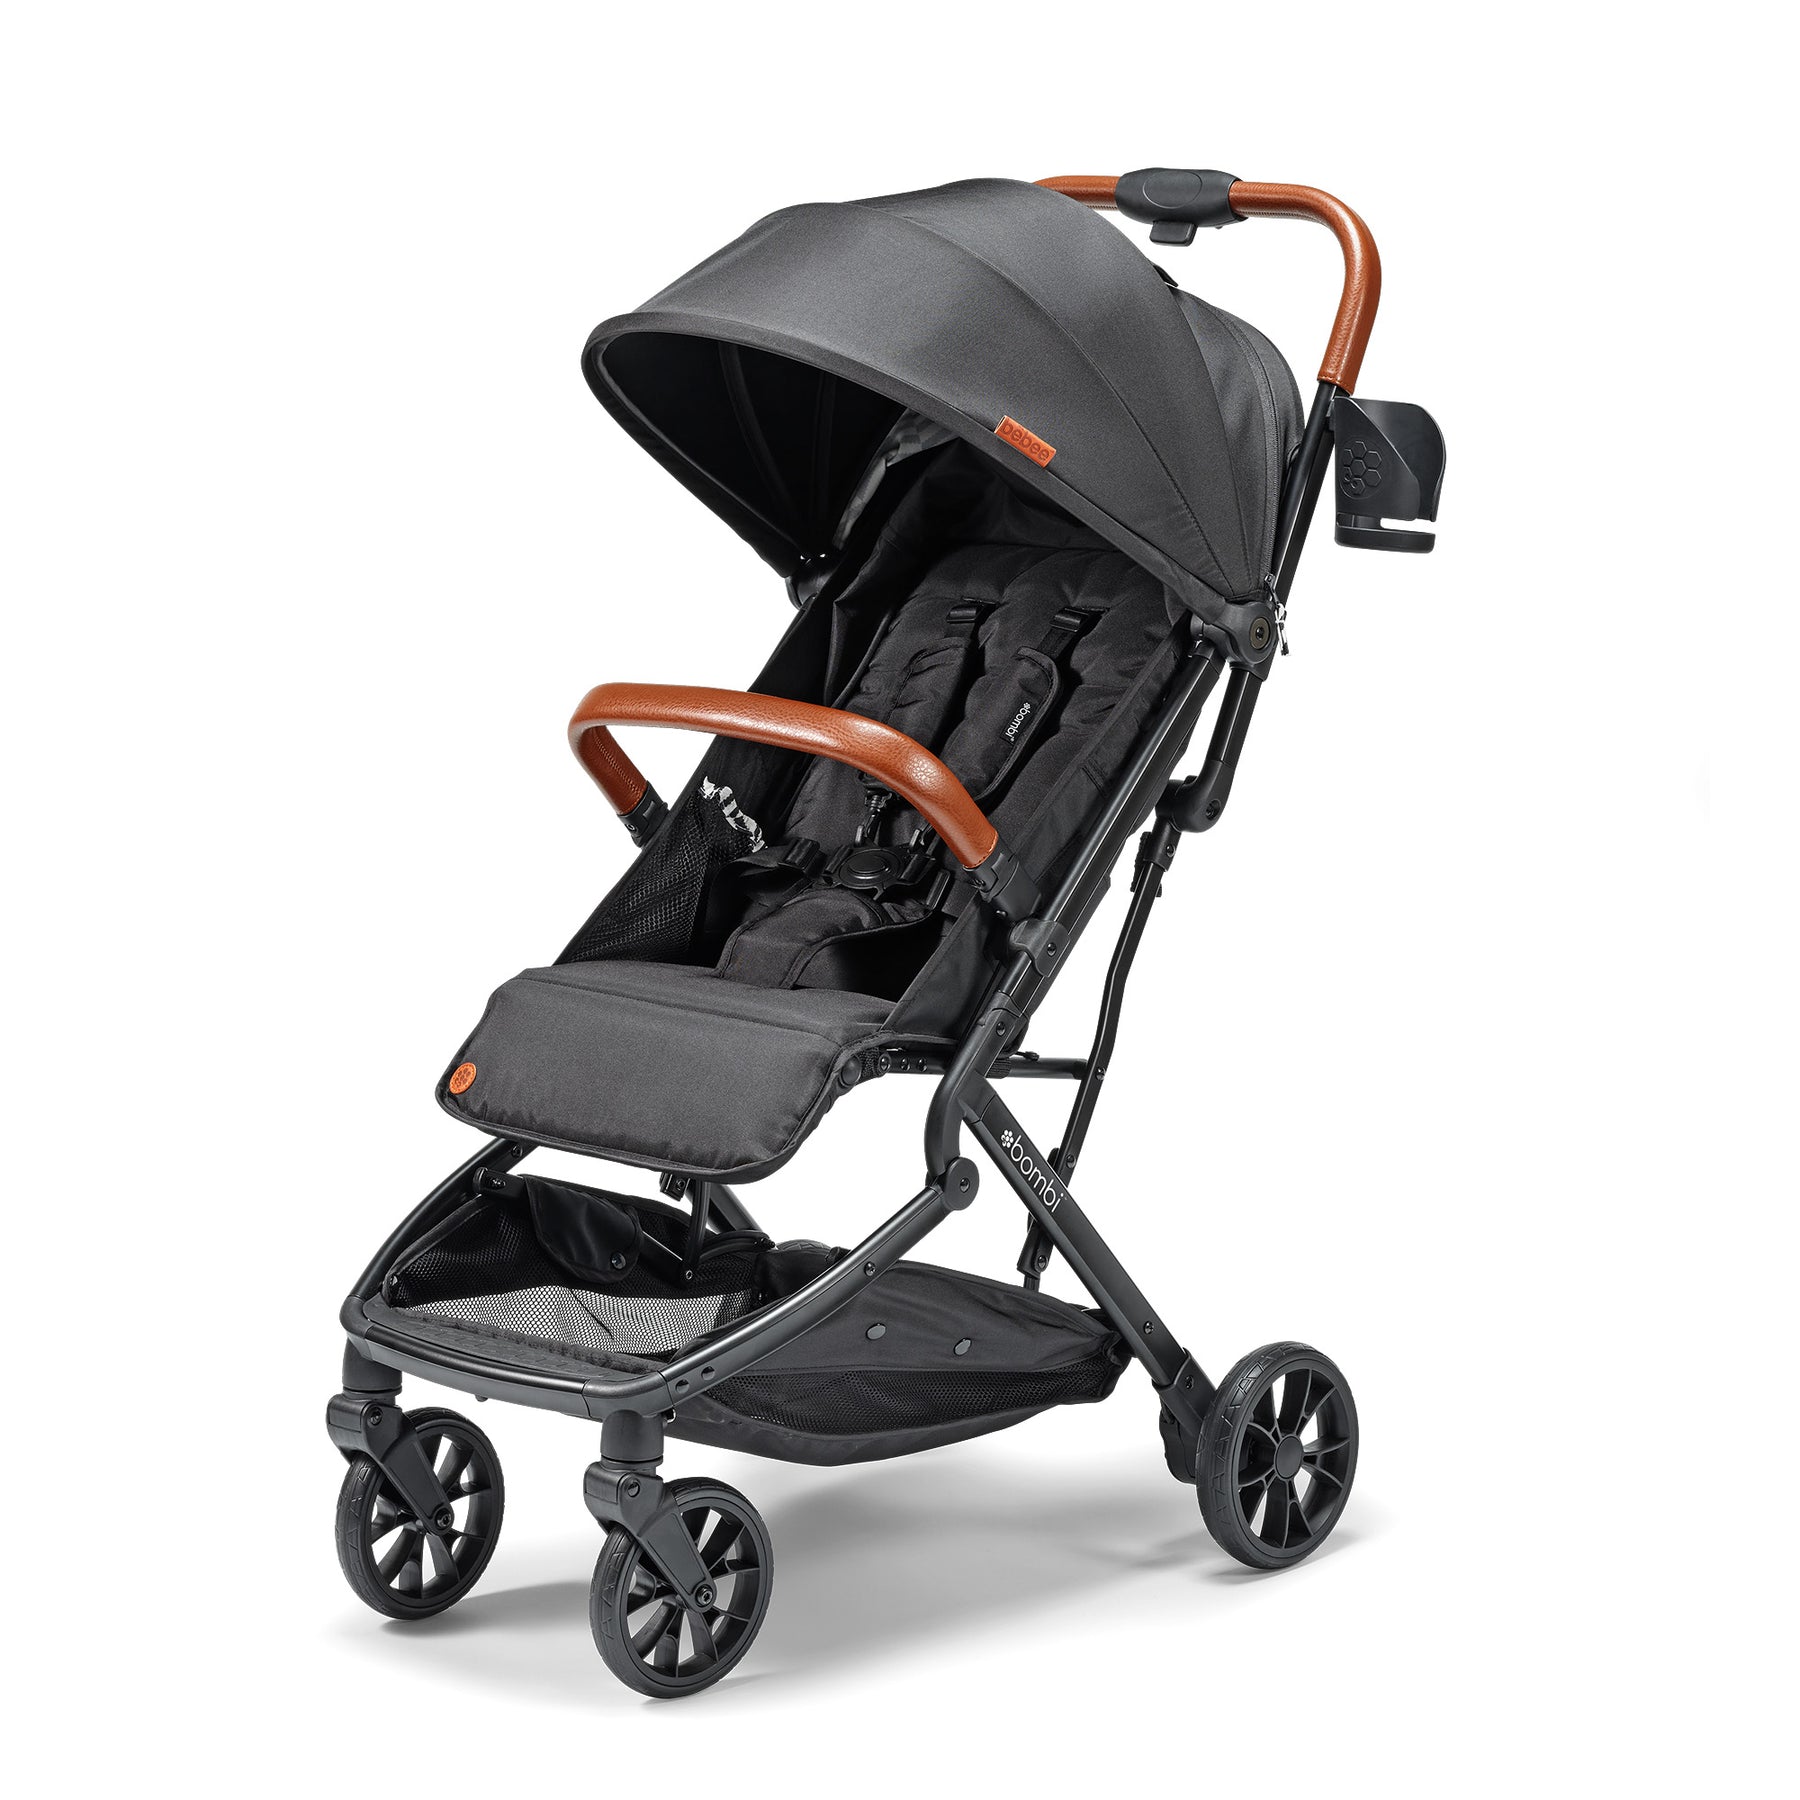  Bugaboo Butterfly - 1 Second Fold Ultra-Compact Stroller -  Lightweight & Compact - Great for Travel - Midnight Black : Baby